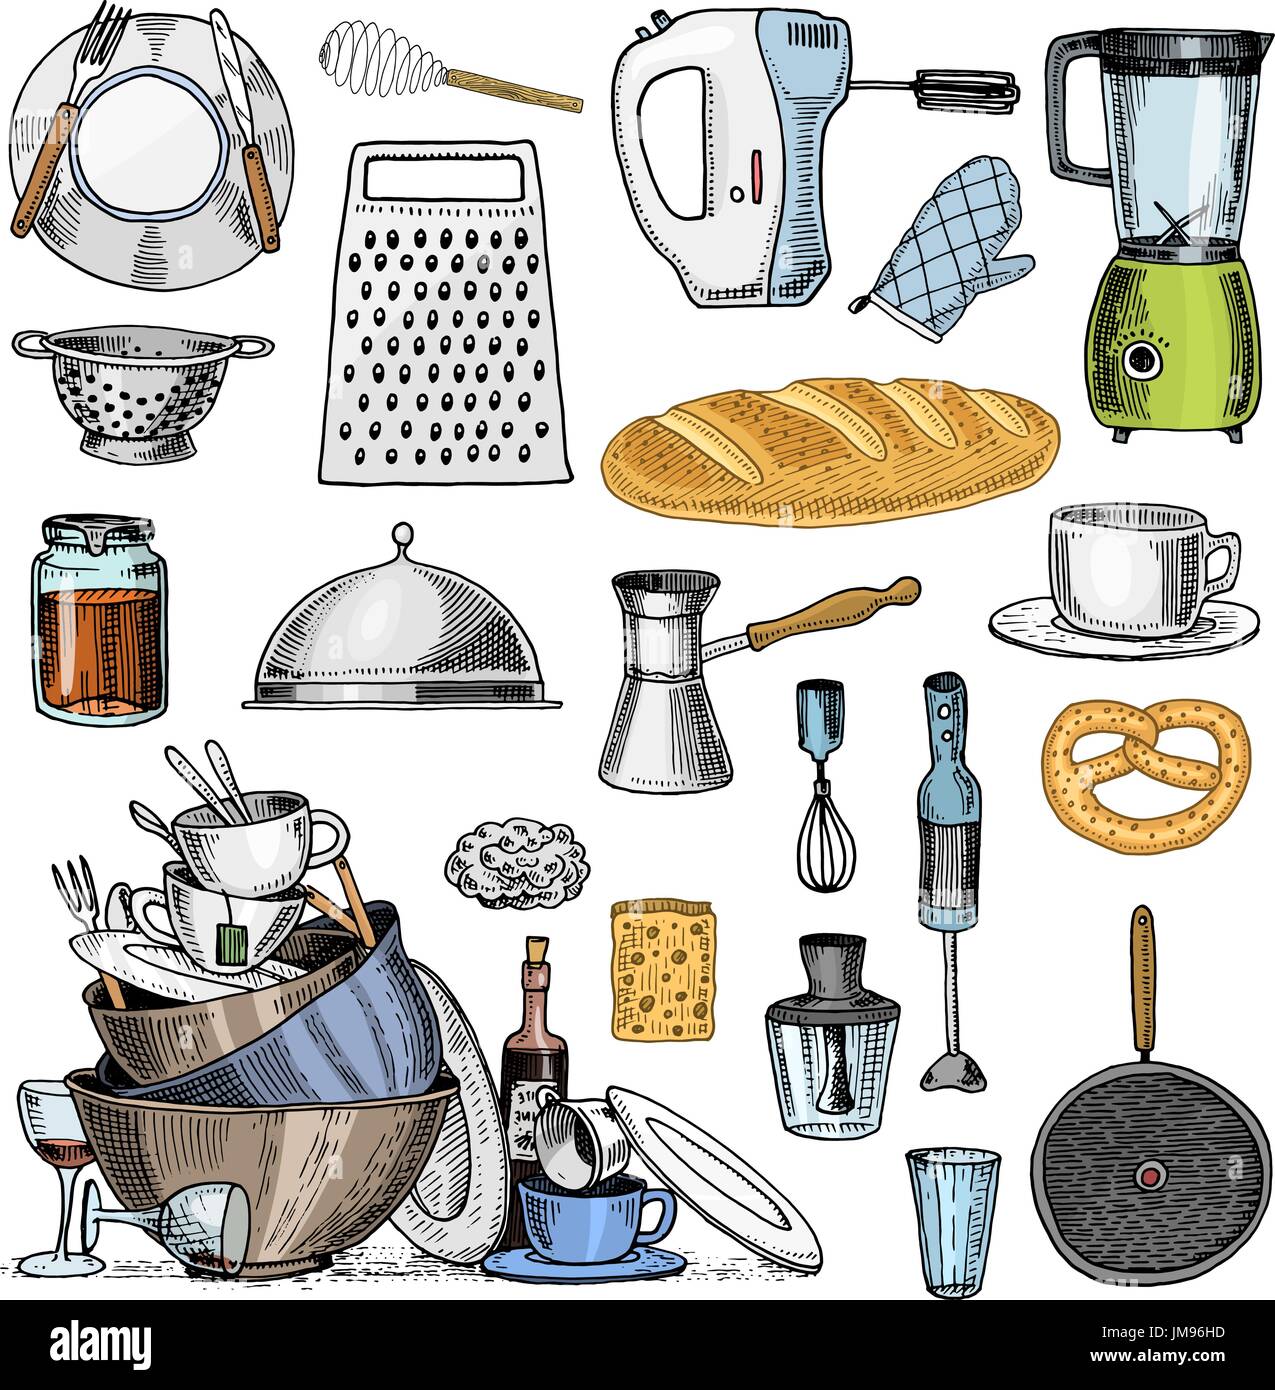 Grater and whisk, frying pan, Turk for coffee, cup of tea, mixer